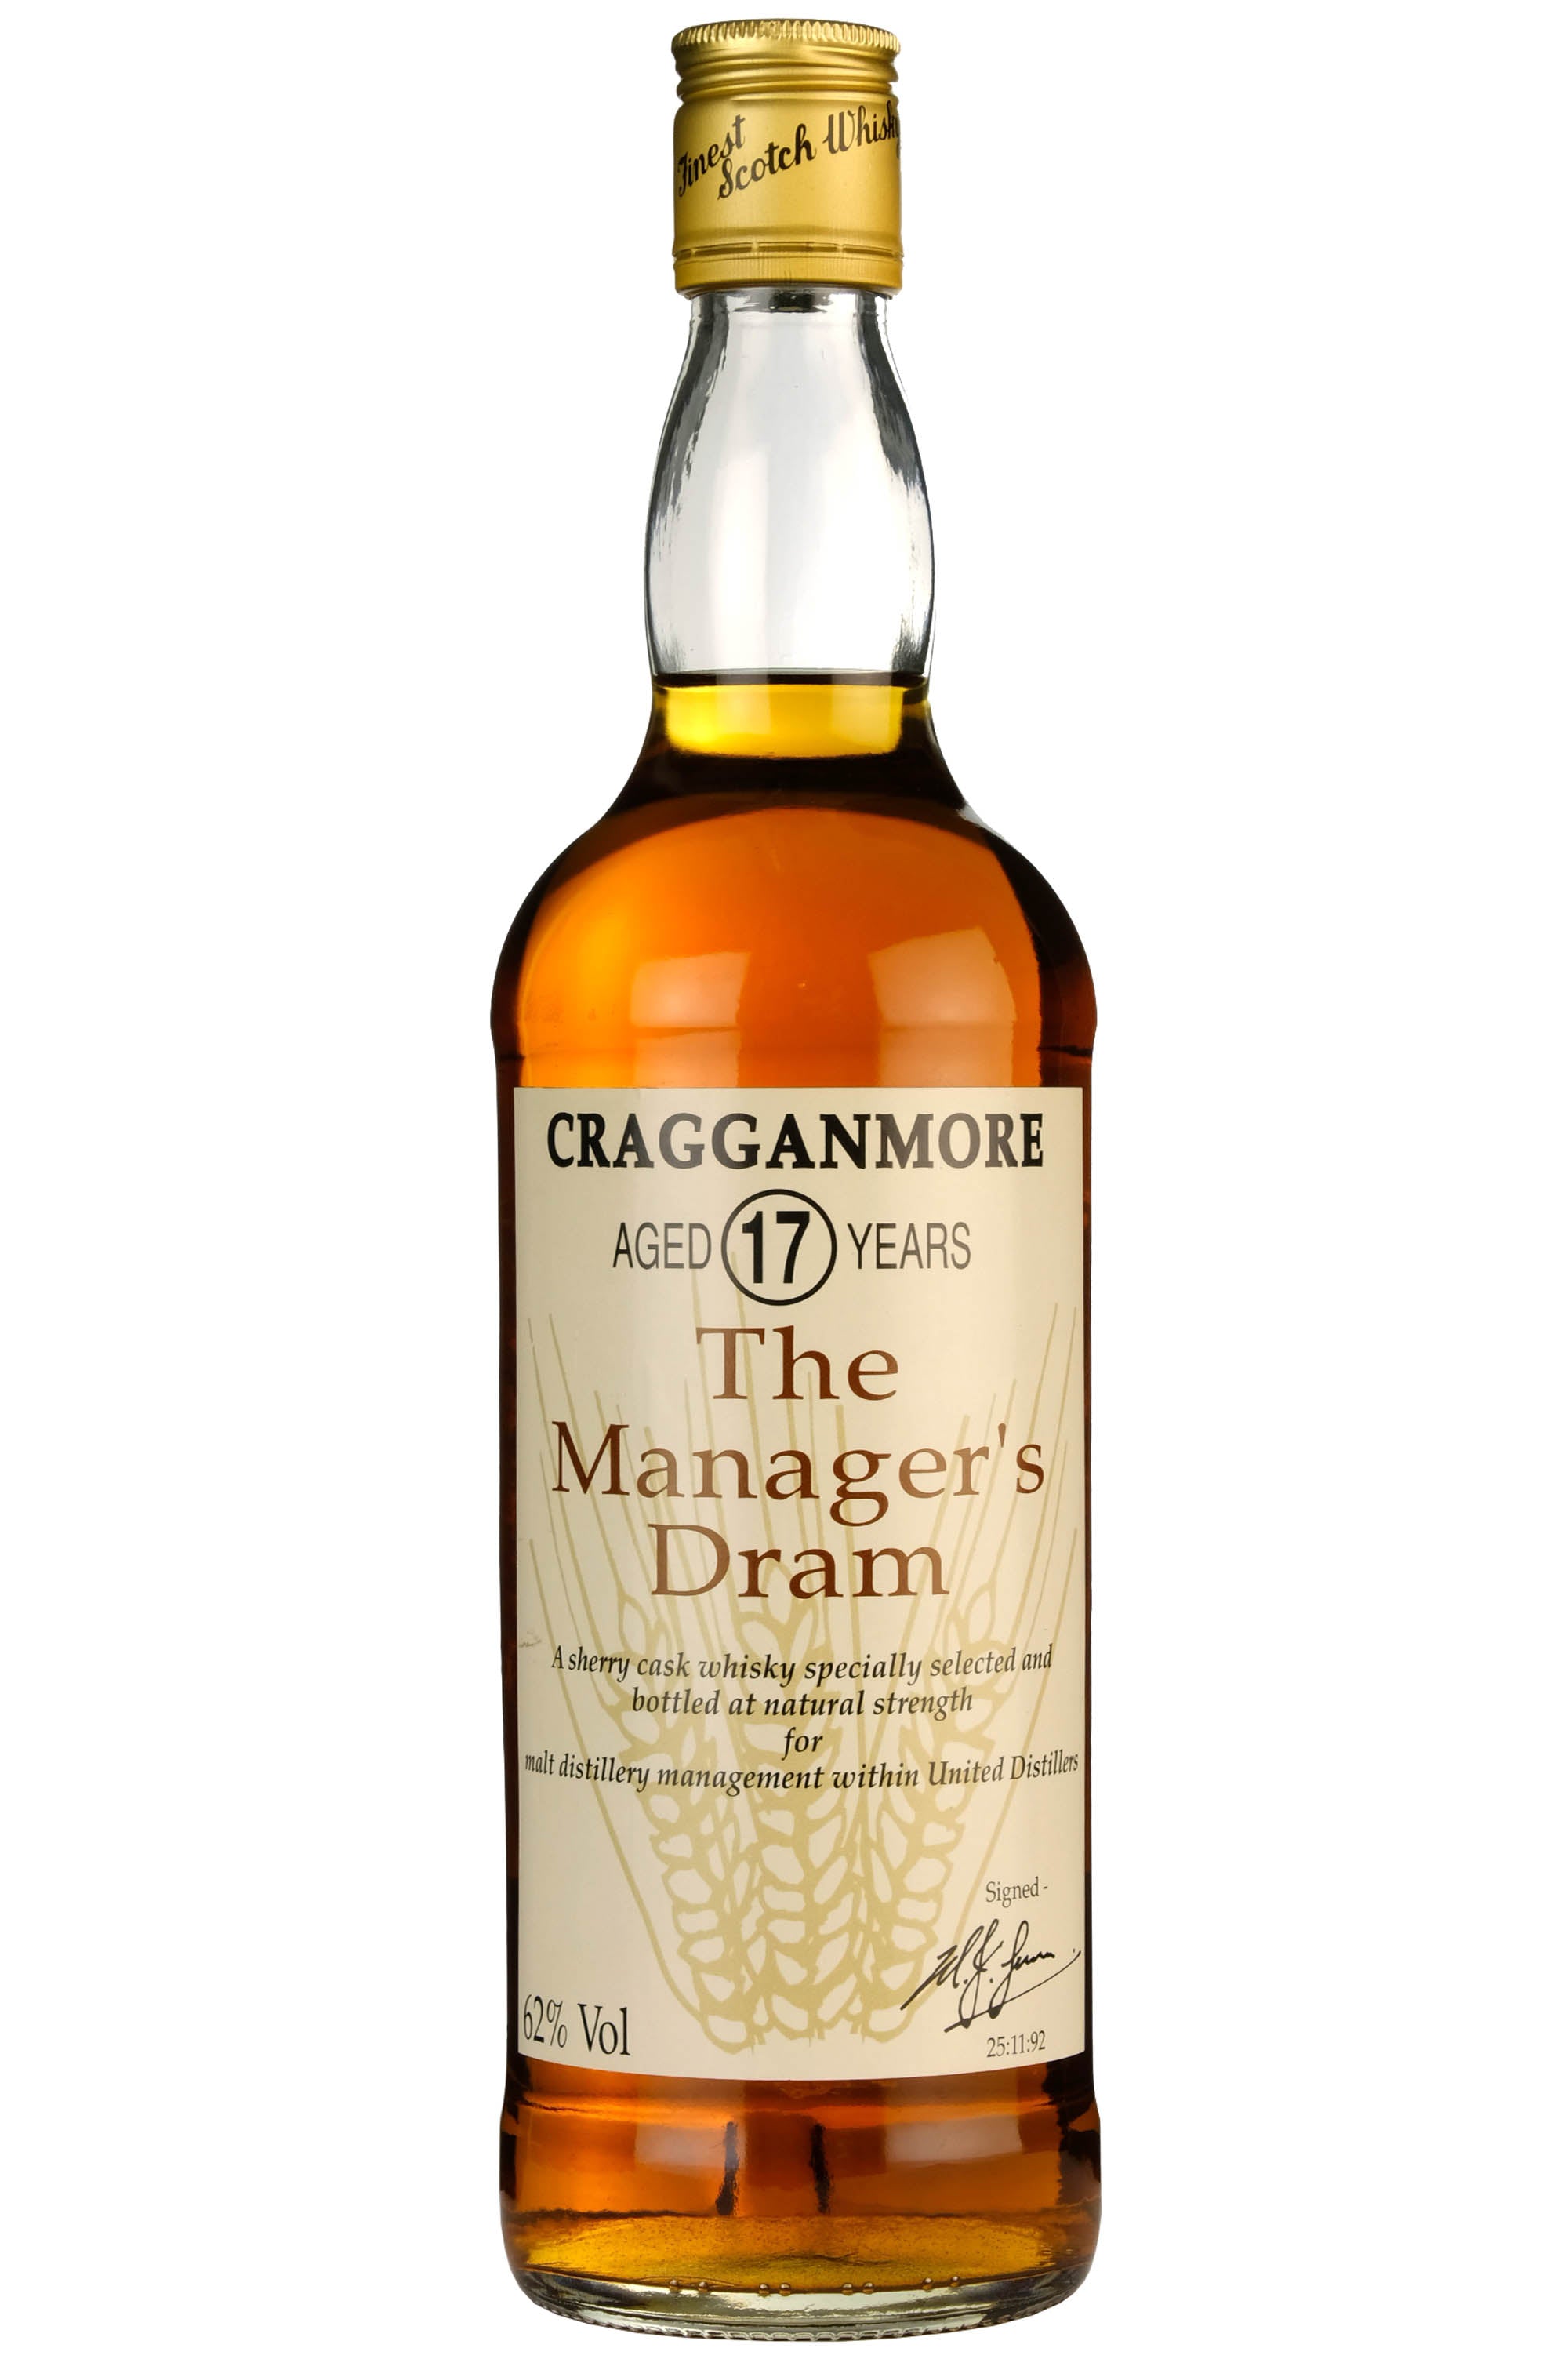 Cragganmore 17 Year Old The Manager's Dram | 1992 Release